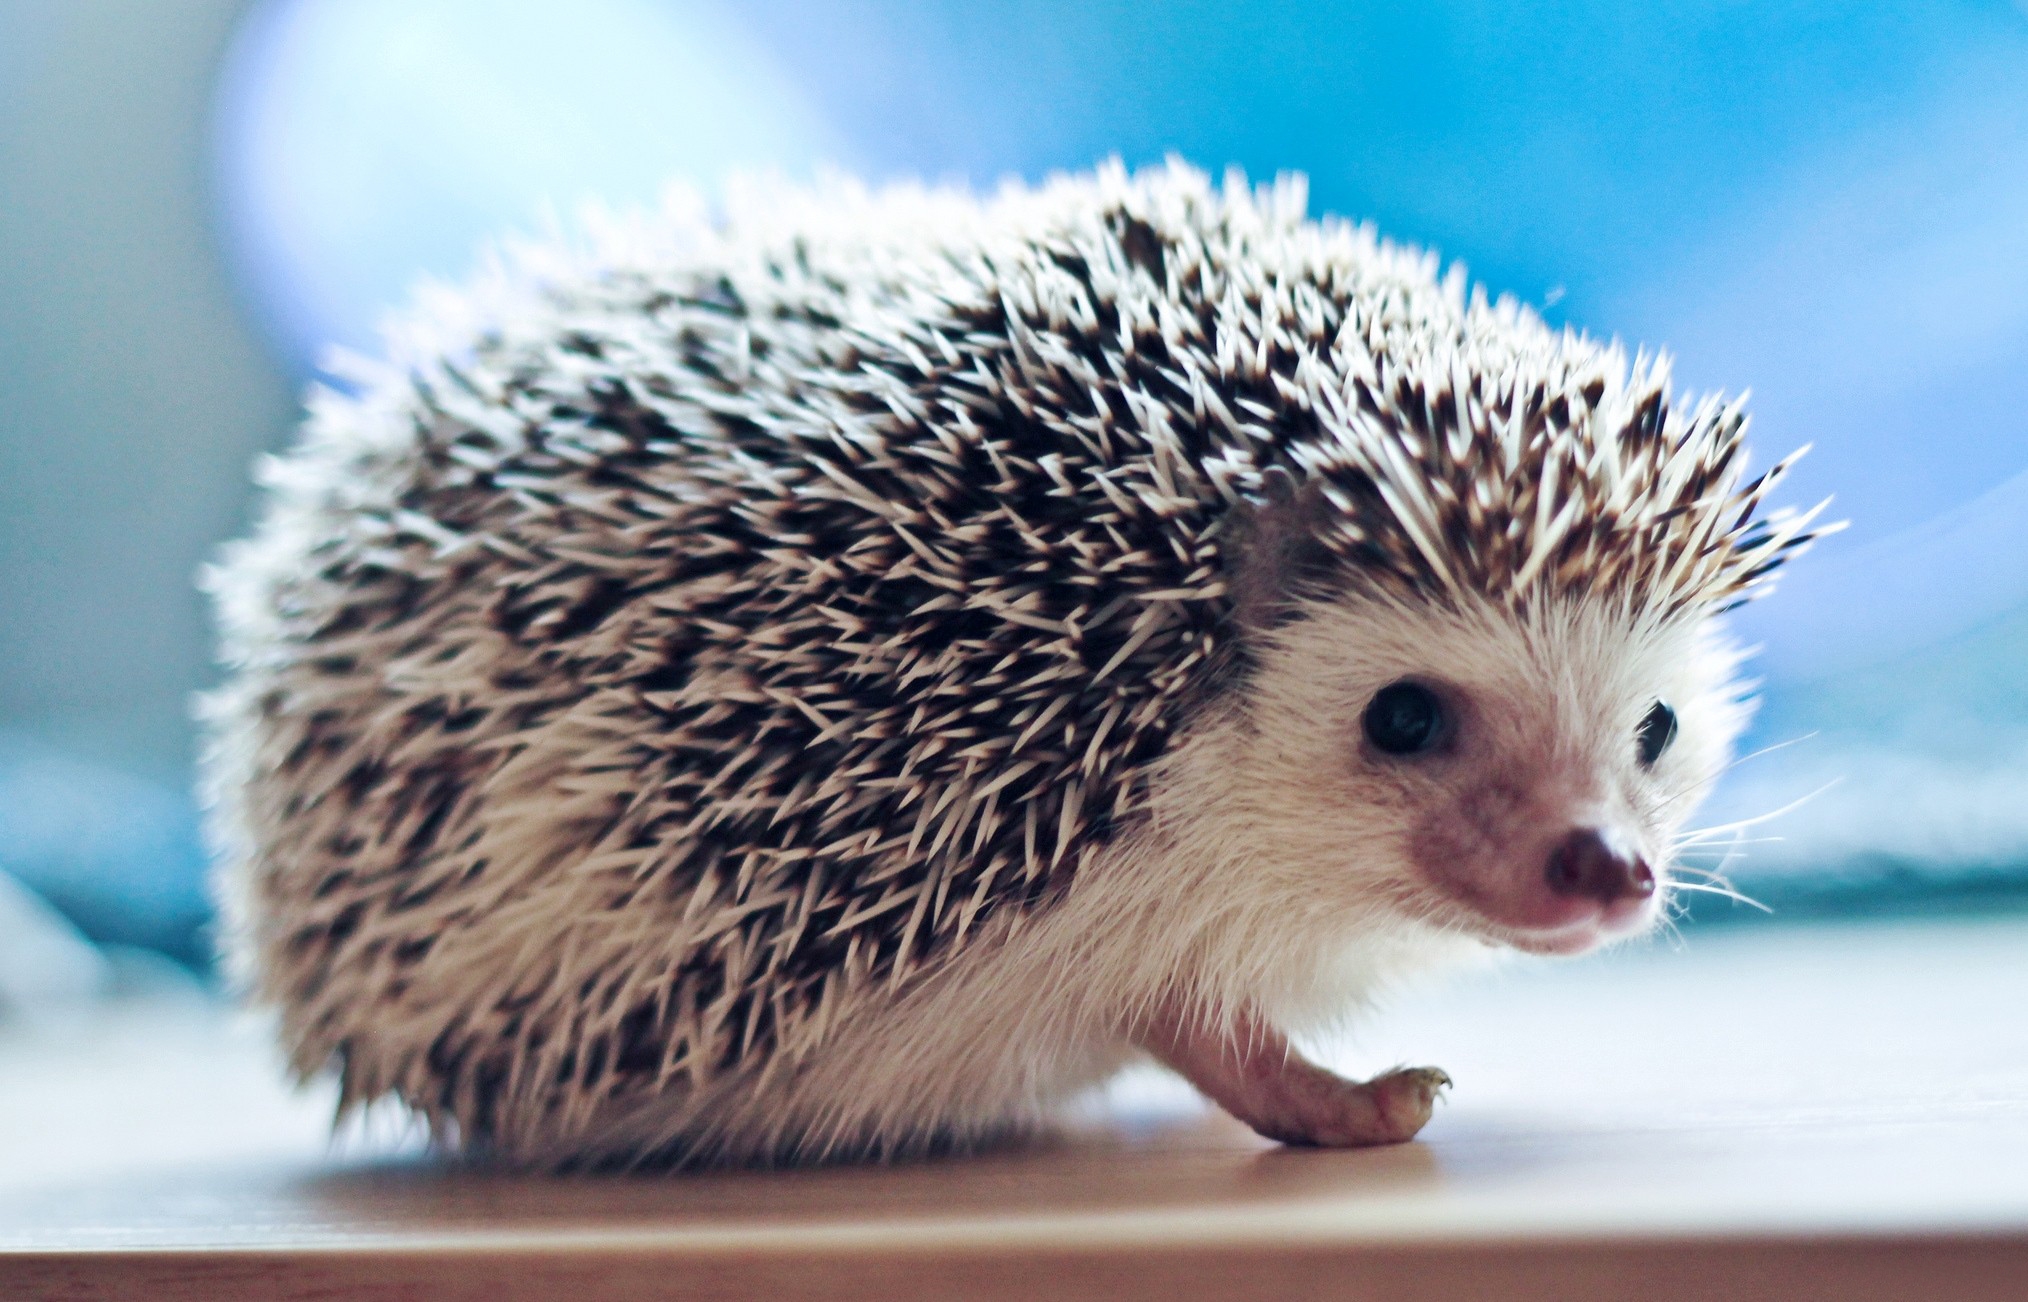 63465 download wallpaper animals, needle, sight, opinion, hedgehog screensavers and pictures for free